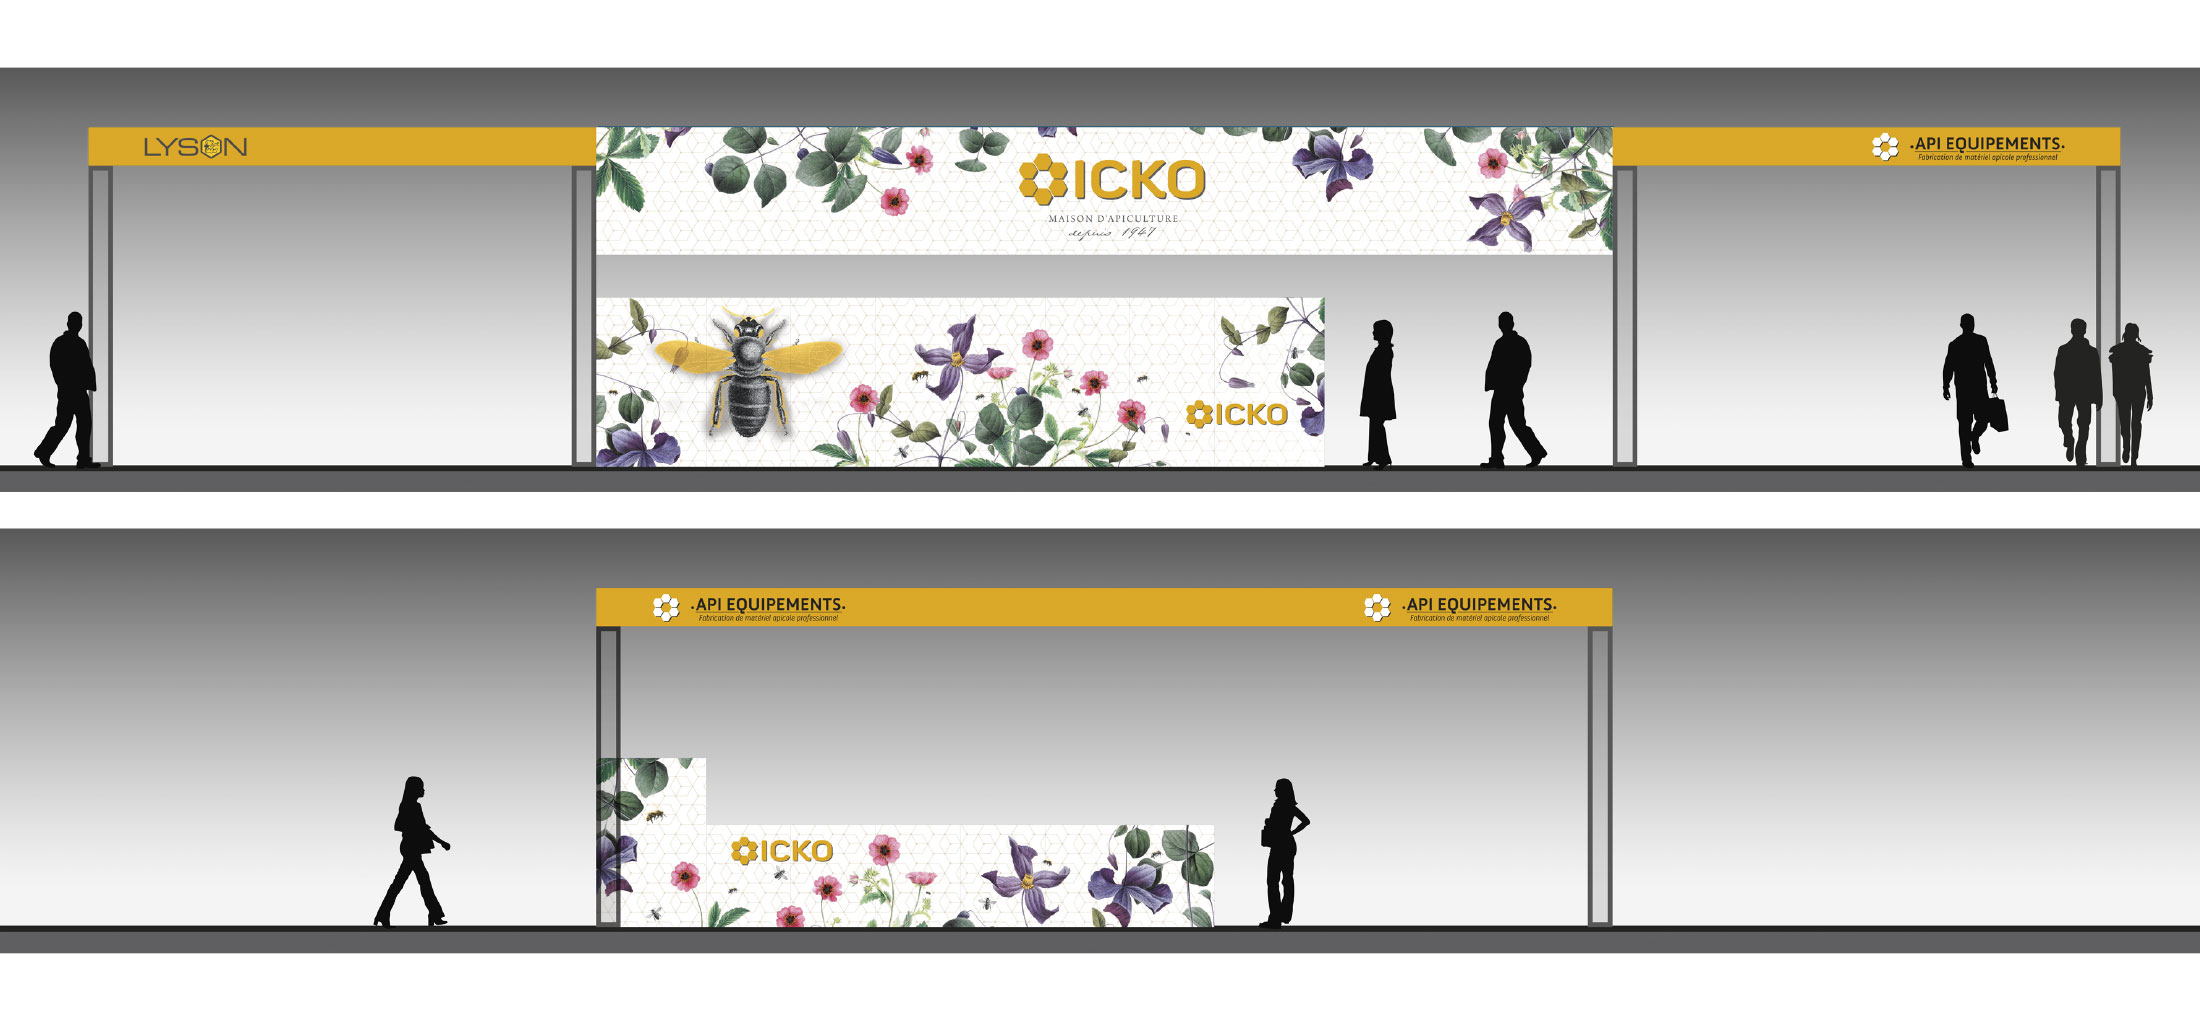 ICKO scenographie stand